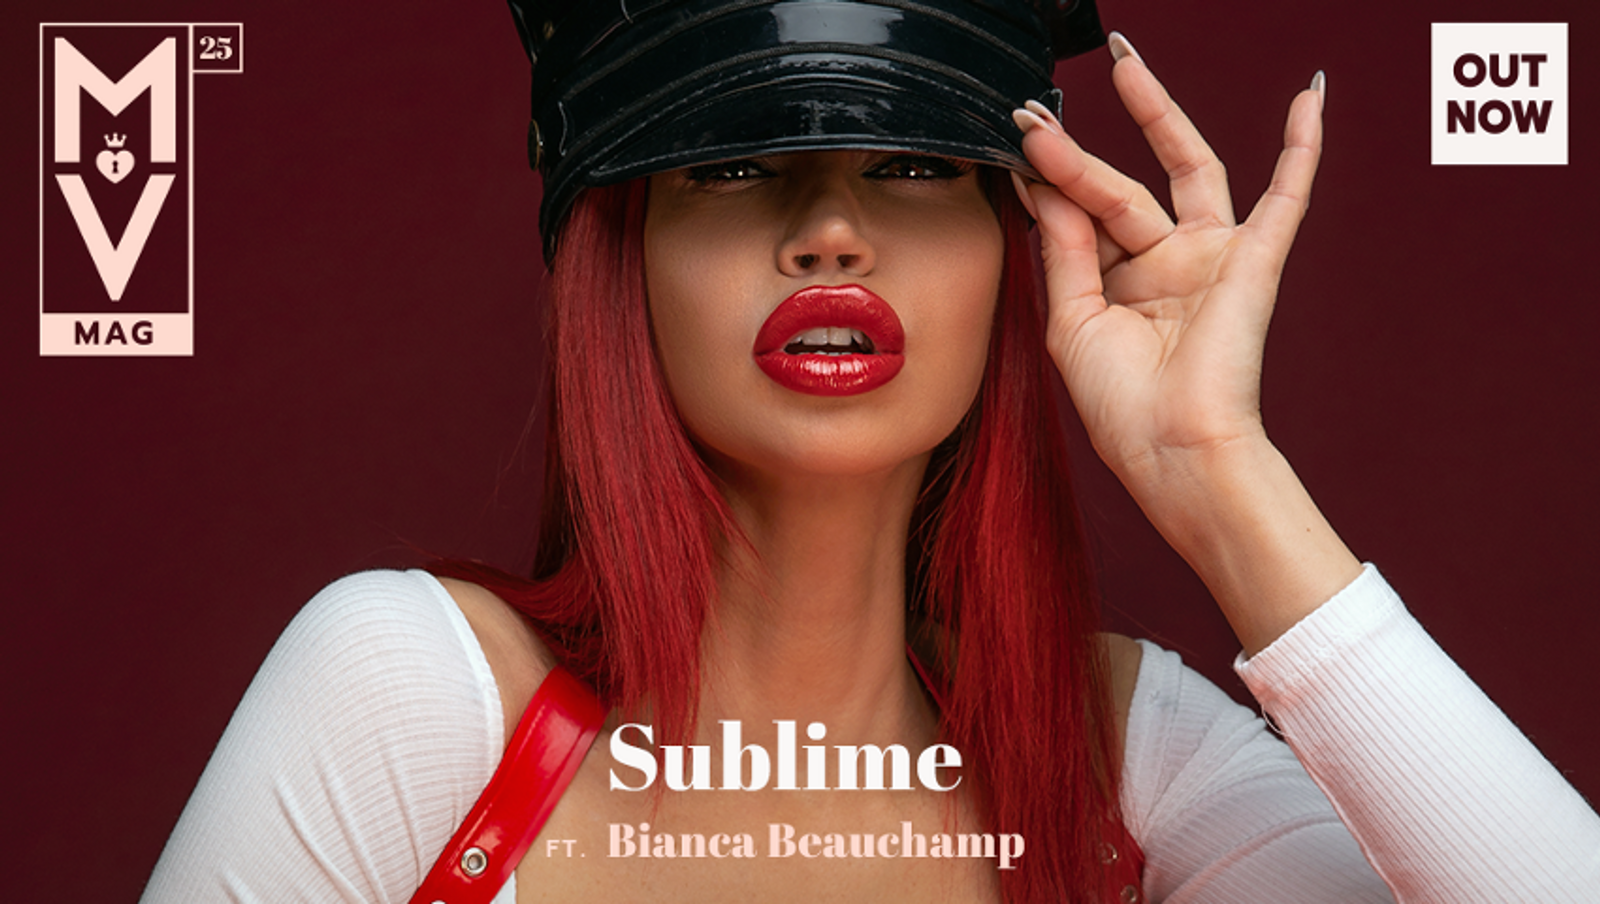 ManyVids Releases MV Mag 27: Sublime